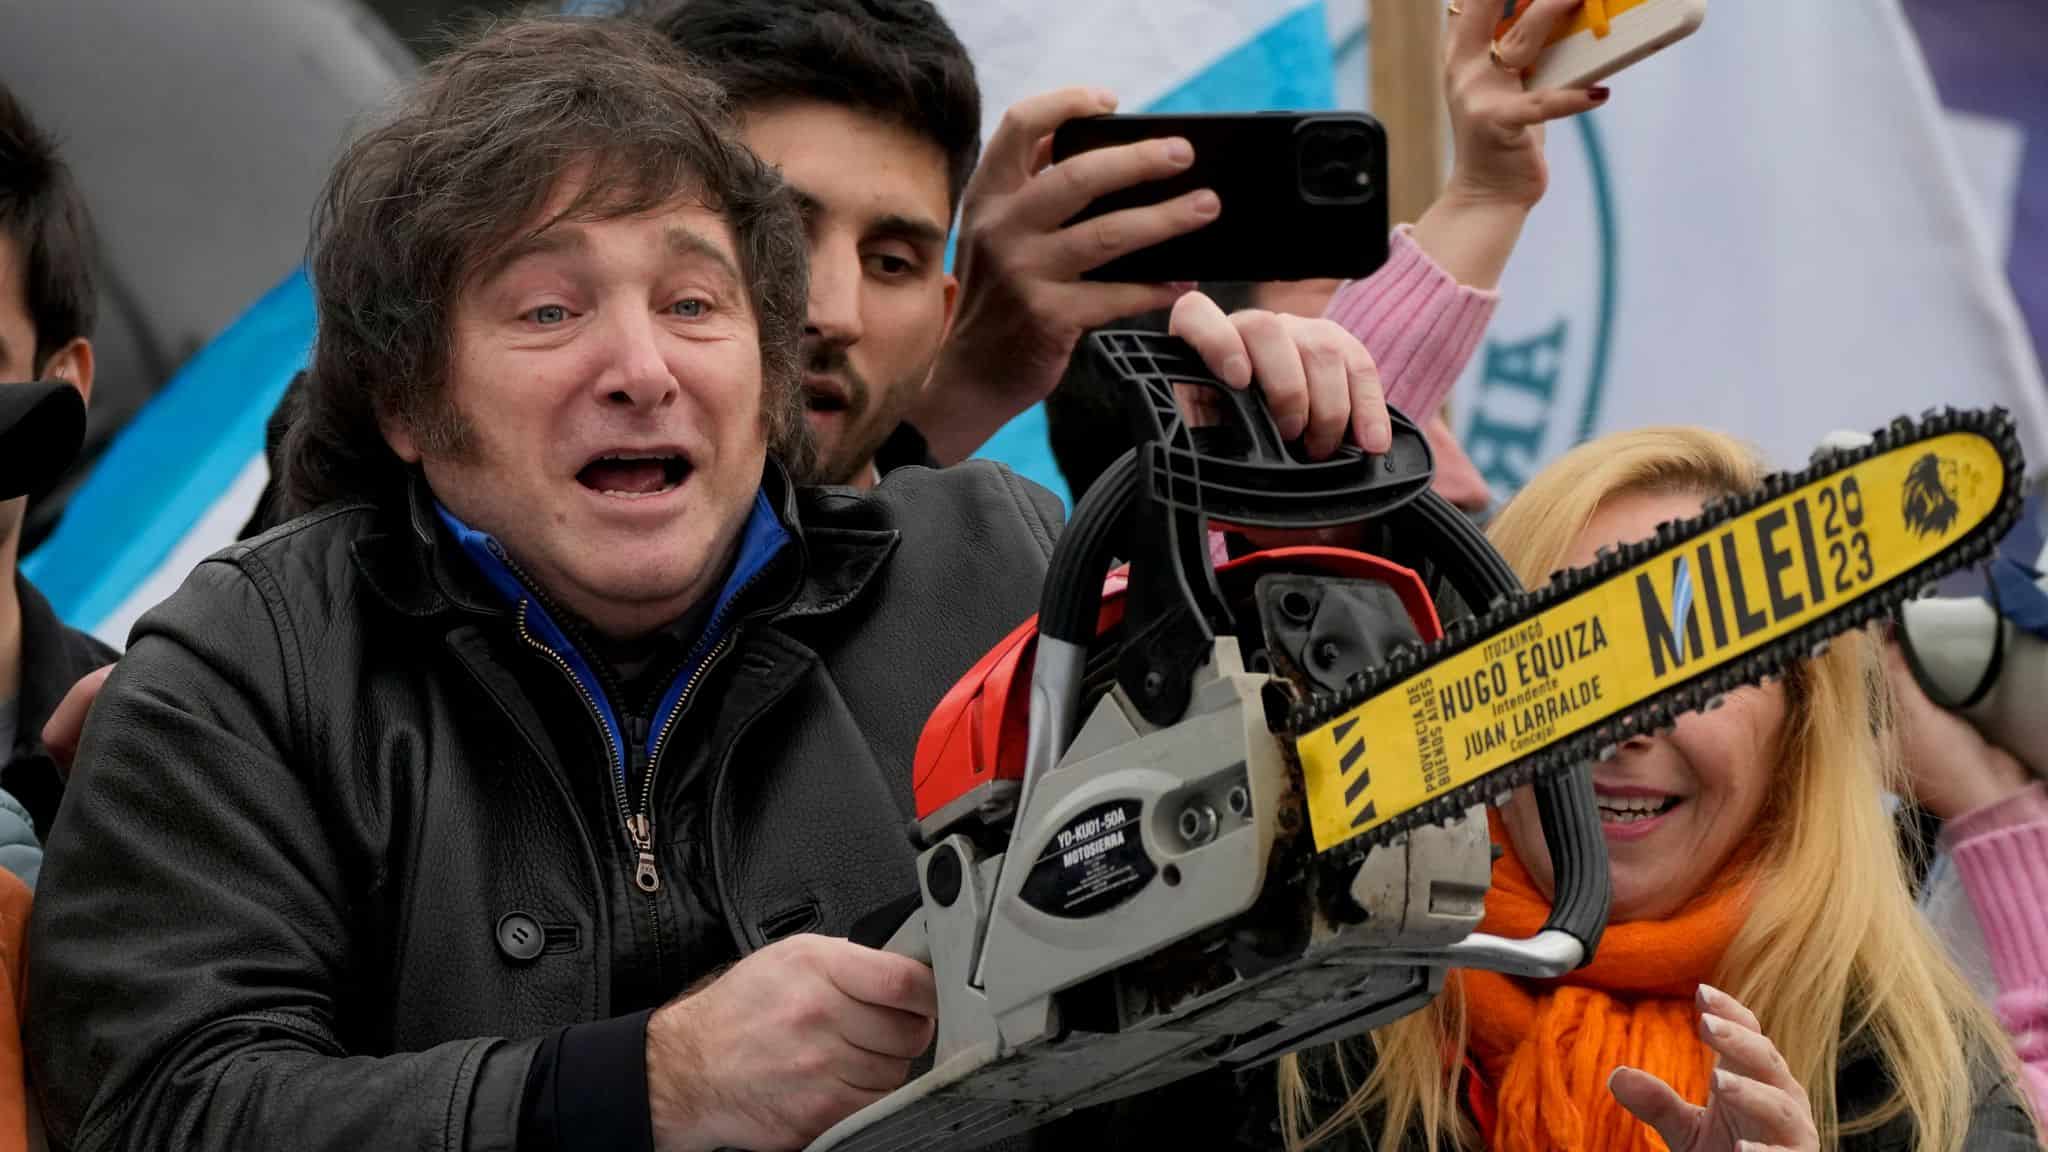 Argentina’s new president – nicknamed ‘the crazy’ and ‘the wig’ – takes centre stage on social media